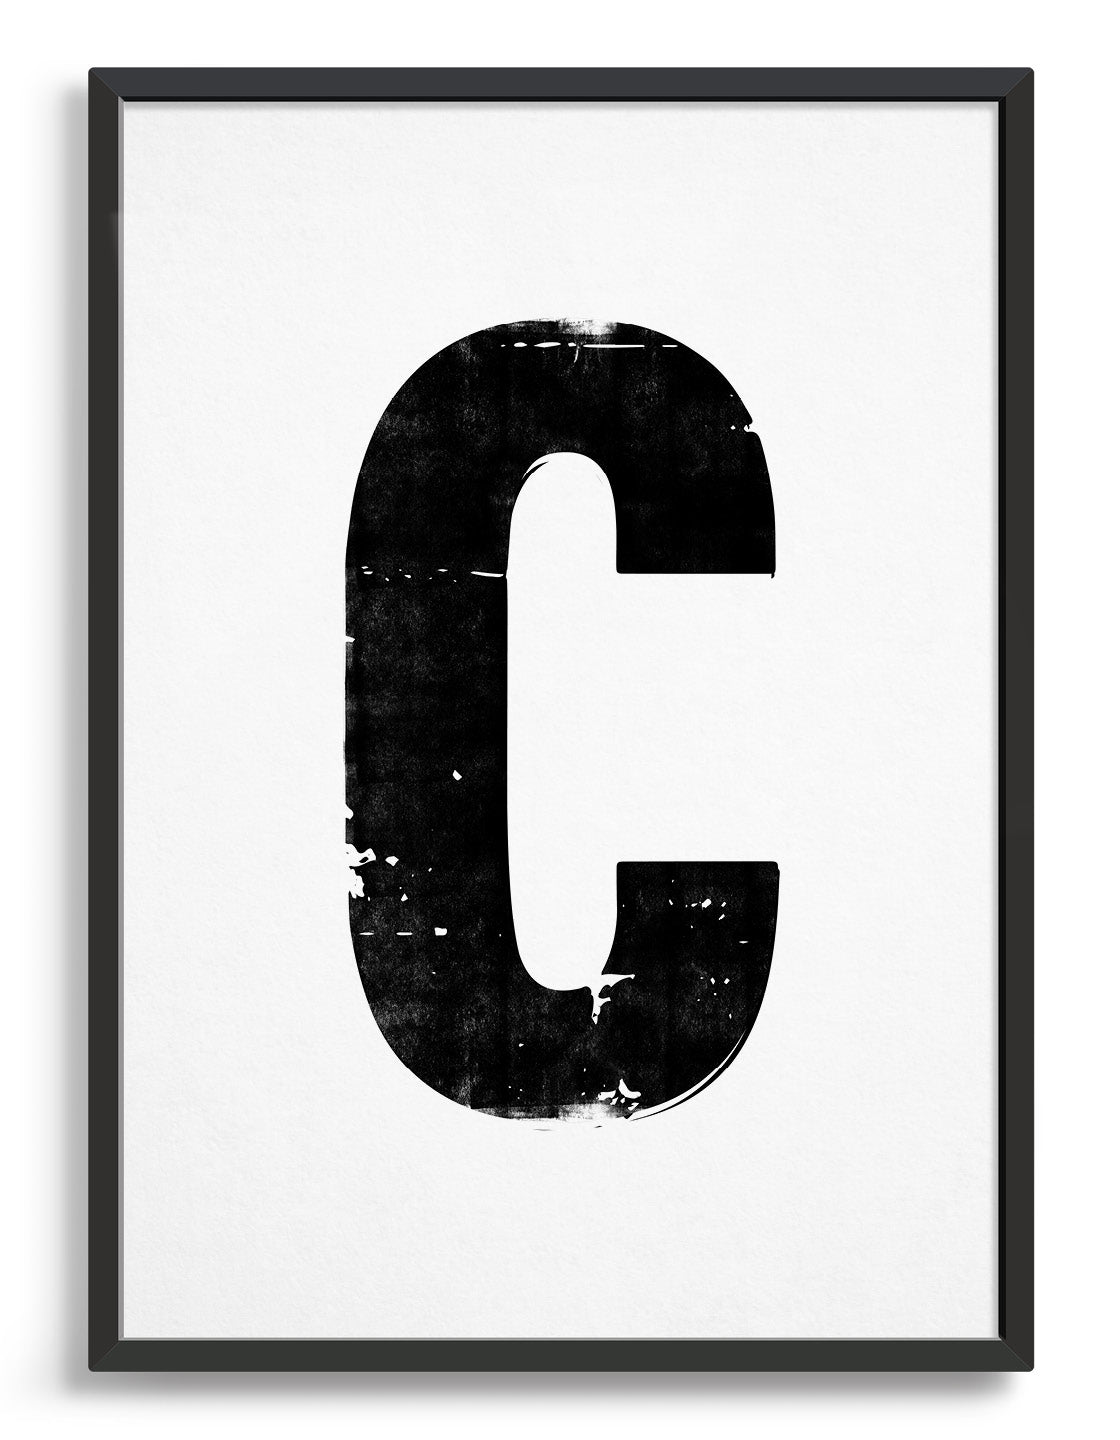 letterpress style alphabet print in blank font against a white background. Image depicts the letter C